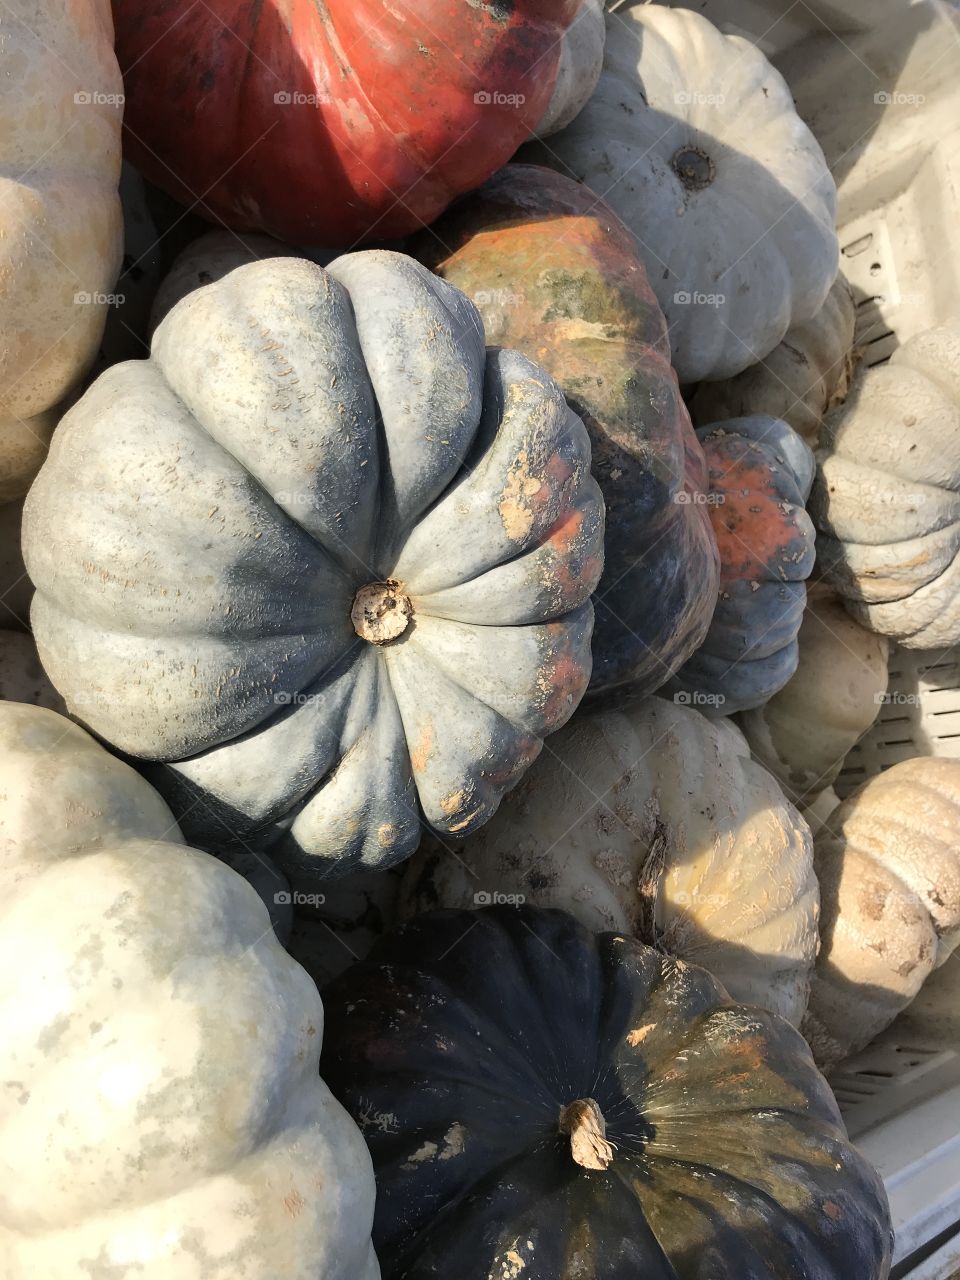 Many types of pumpkins 